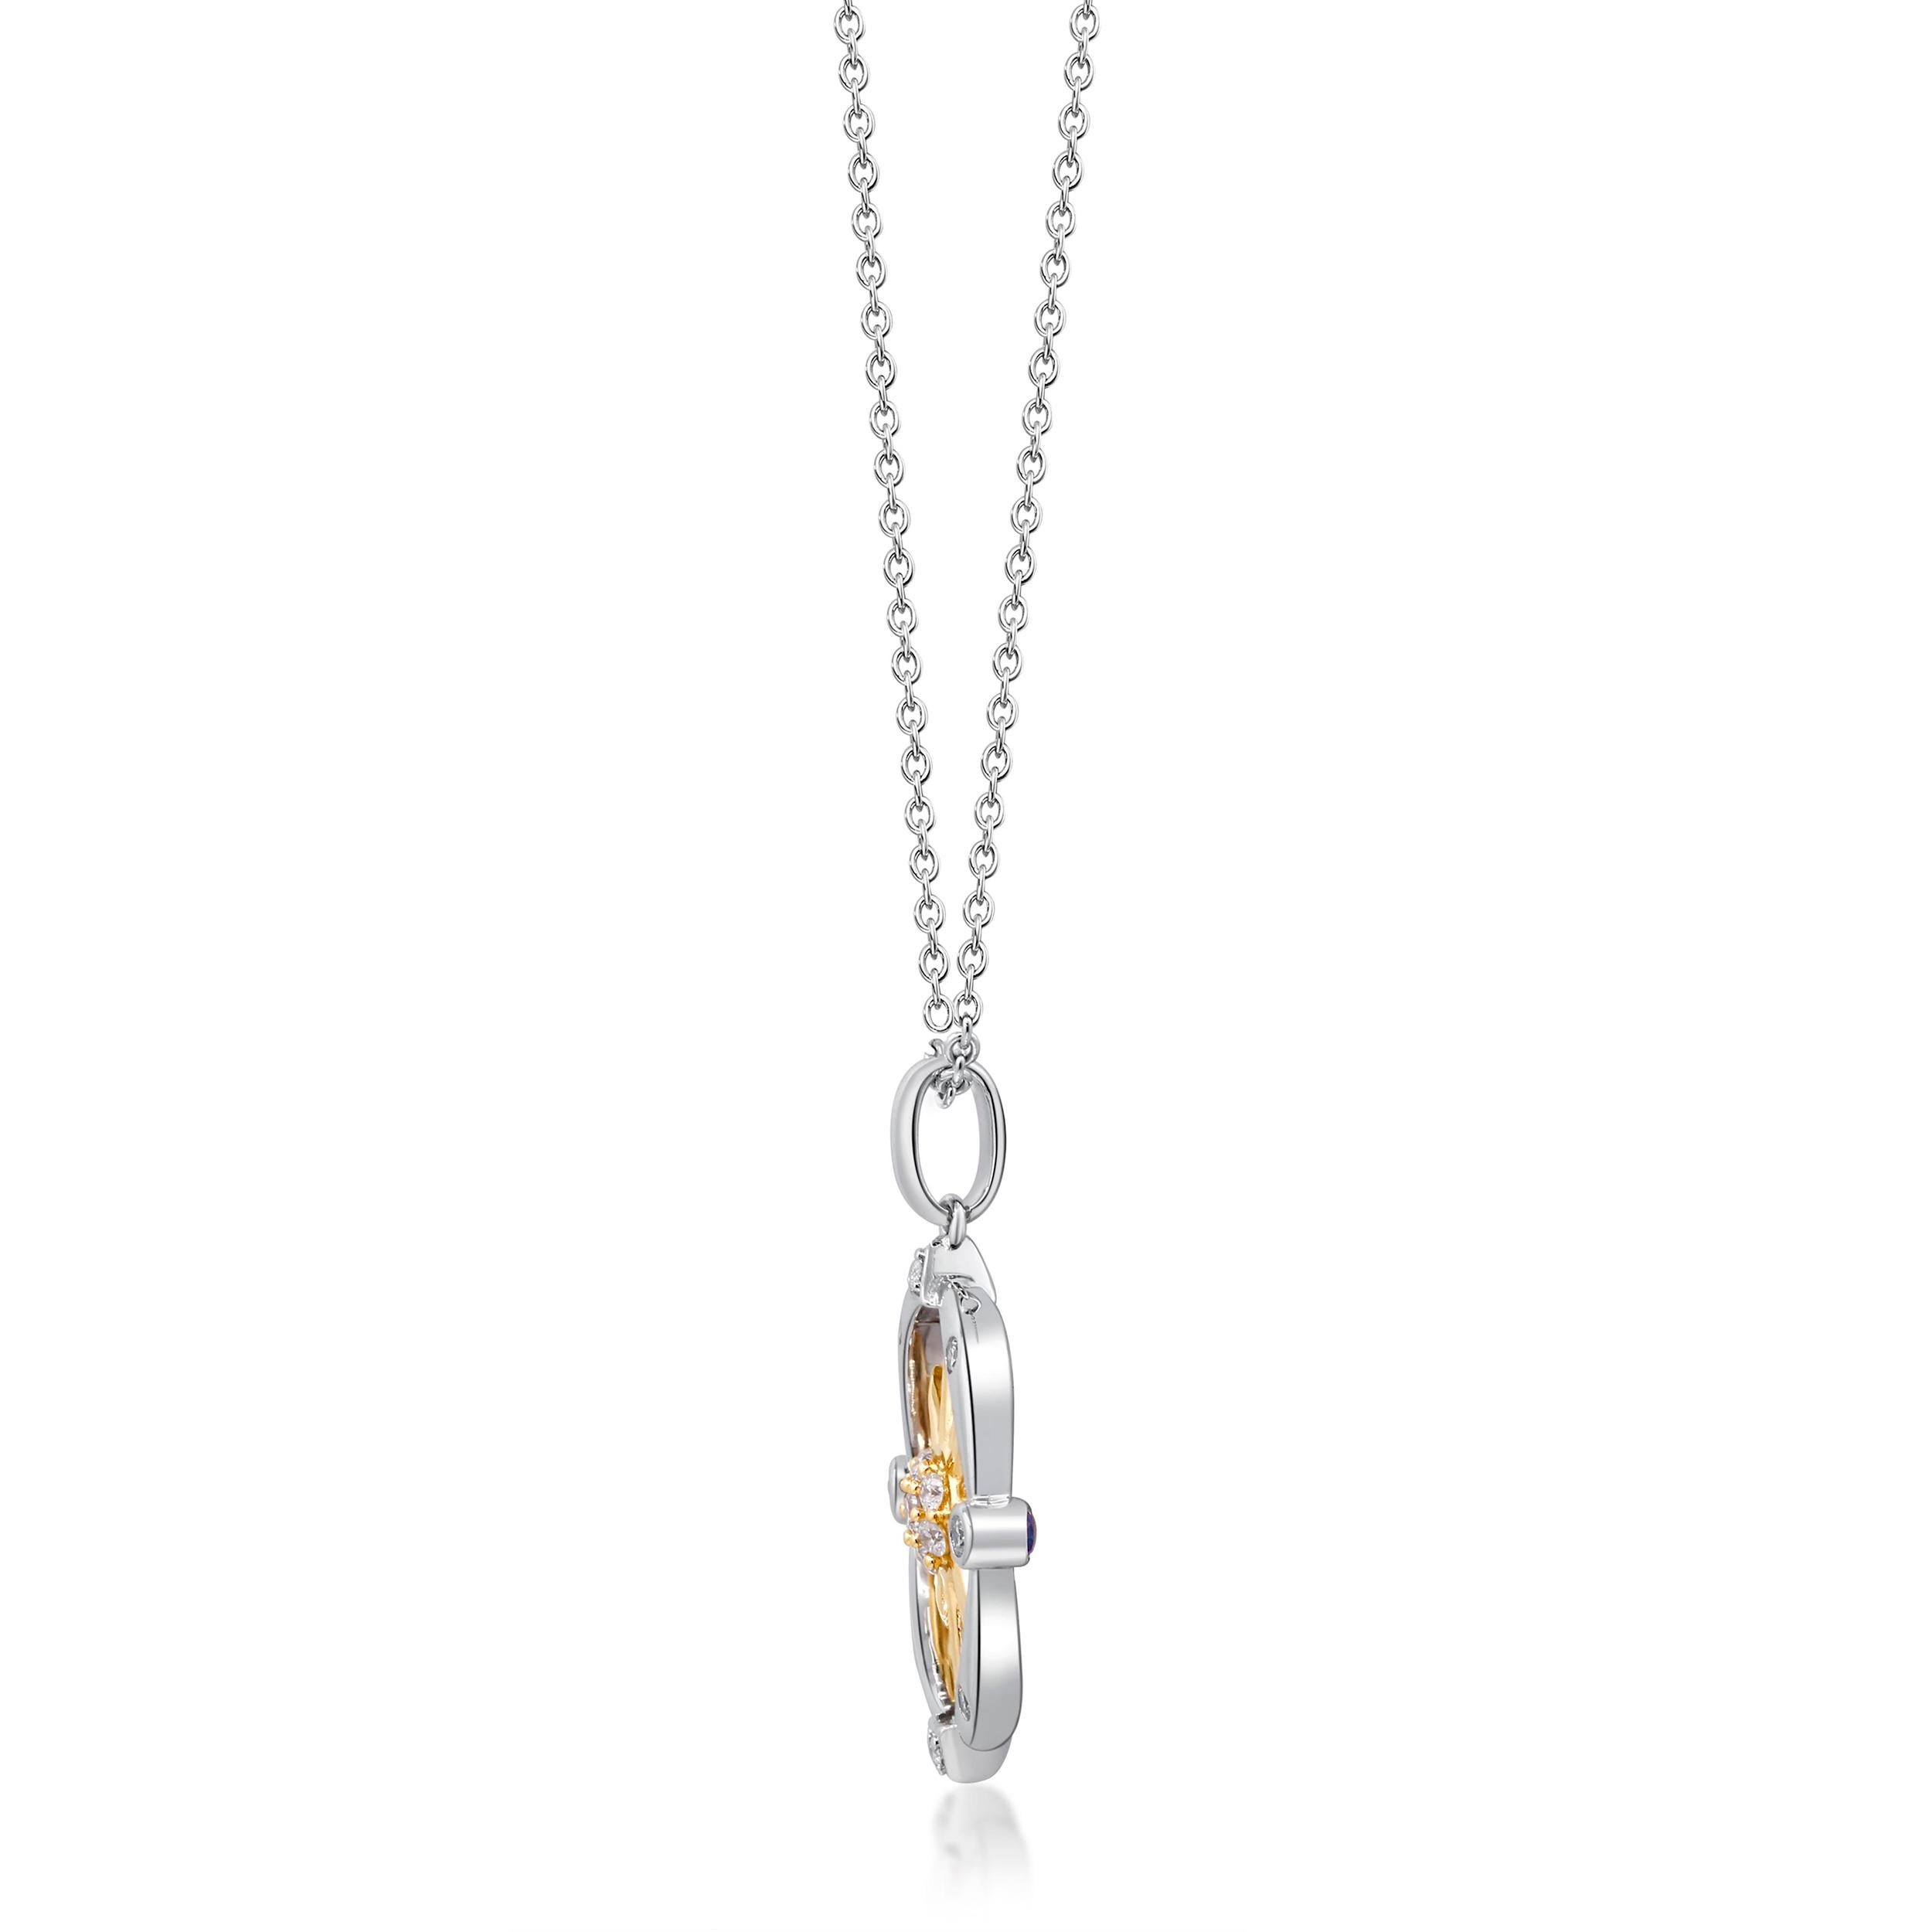 *Adorn your neck with a shiny gold guide made of mother of pearl. let our precious Smithsonian collection designed by G&G Compass Pendant offer you direction and help you feel Secure with where you are at.
* The Smithsonian Jewelry collection which